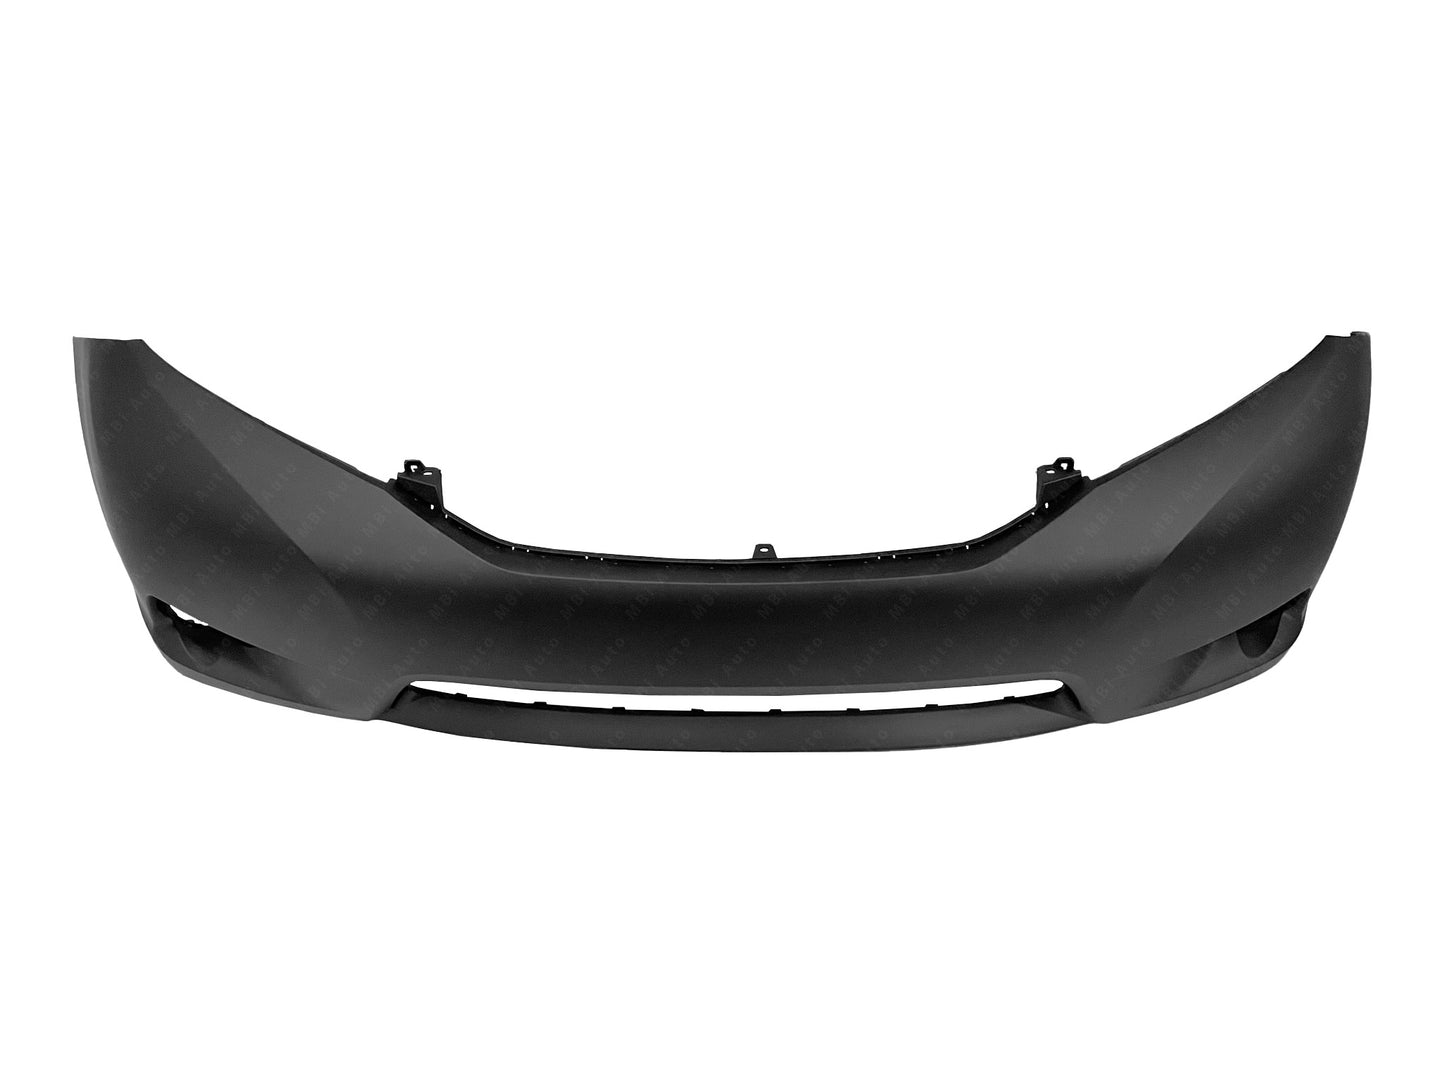 Toyota Sienna 2011 - 2017 Front Bumper Cover 11 - 17 TO1000369 Bumper-King